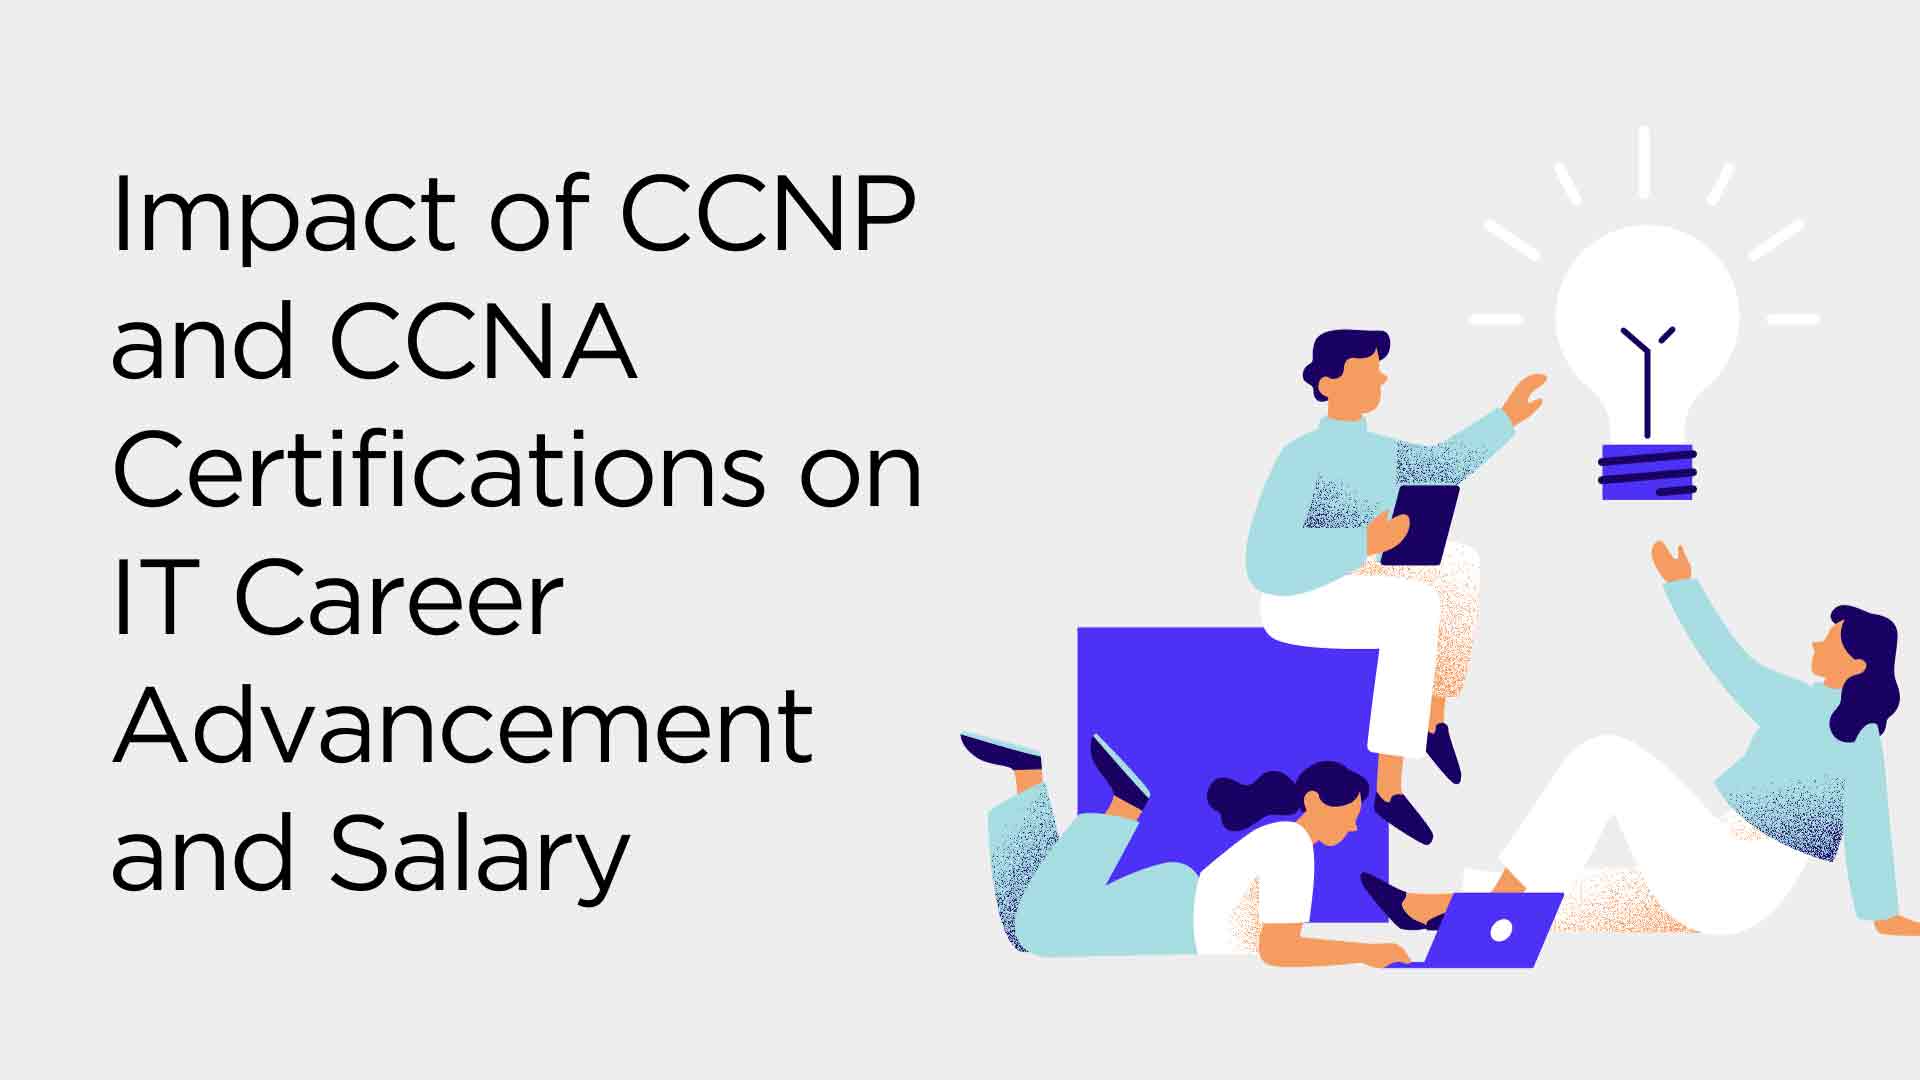 Impact of CCNP and CCNA Certifications on IT Career Advancement and Salary